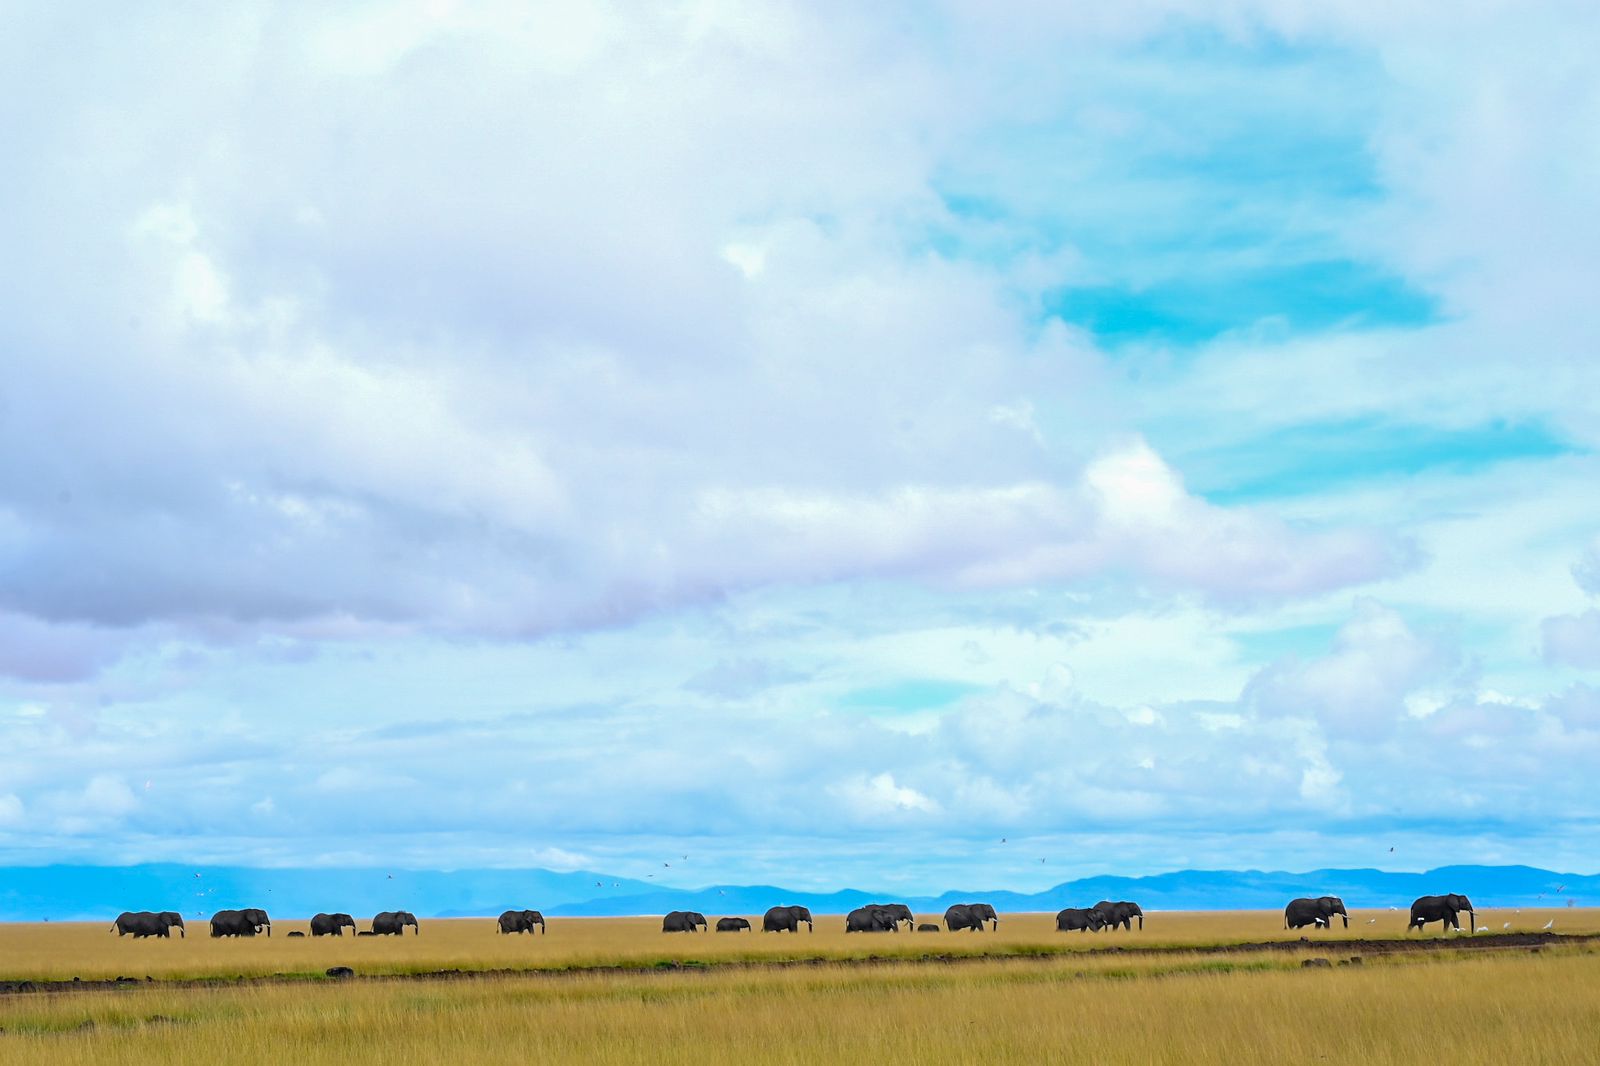 A photo of elephants in Amboseli National Park.